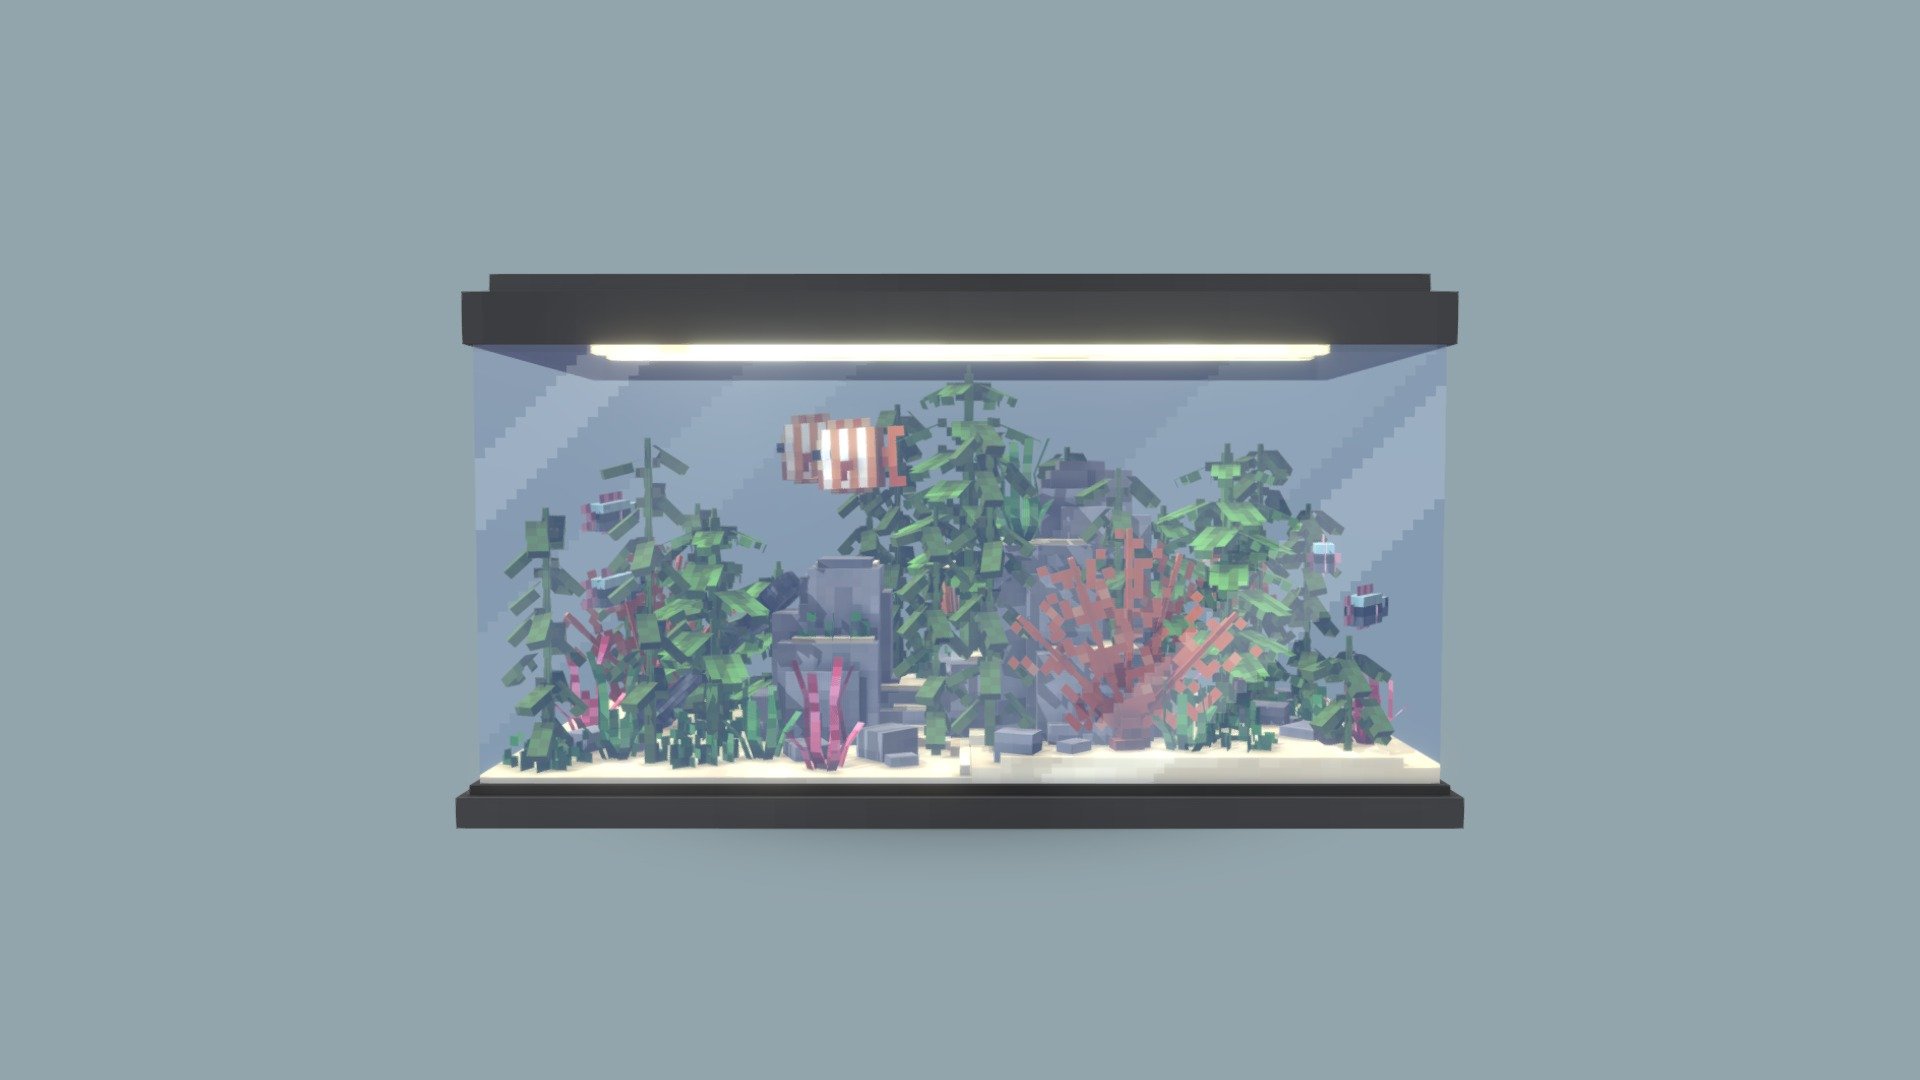 It's a simple lowpoly aquarium. It contains two different species of fish circulating between vegetation and scenery.

Twitter: twitter.com/_Owcee

This model's tweet: twitter.com/_Owcee/status/1570830012672253954

Modeling and painting on blockbench 3d model